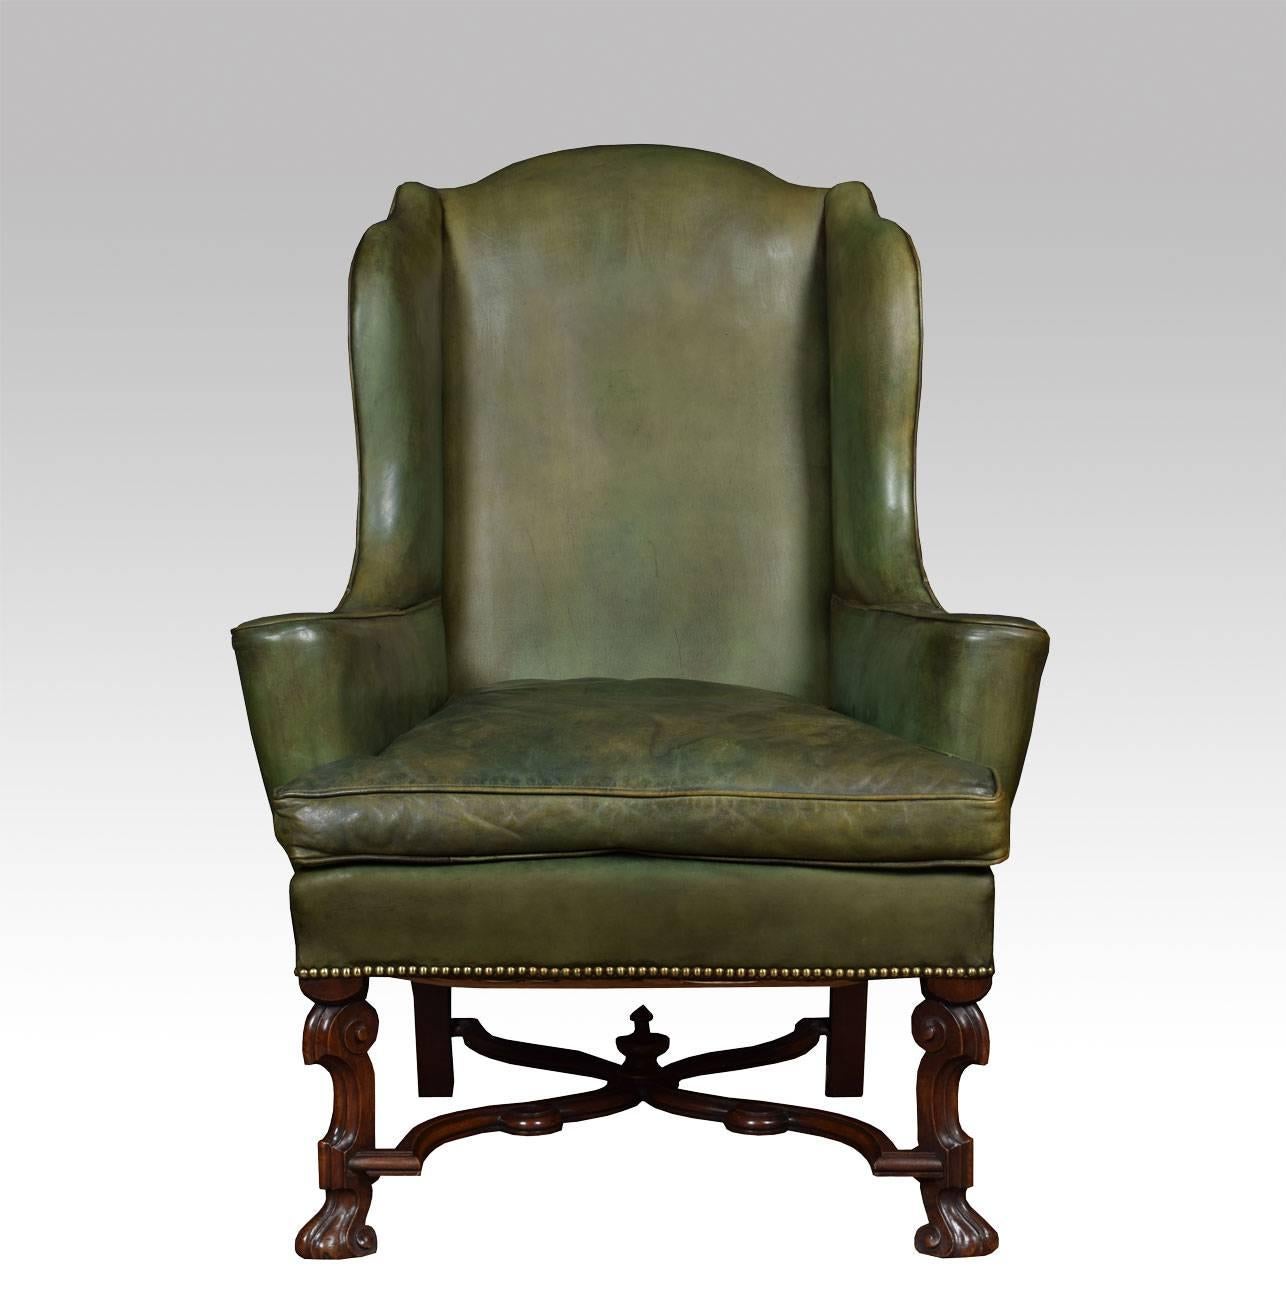 Walnut leather covered wing armchair the arched top, back, arms and seat cushion covered in green leather and all raised up on flemish scroll legs united by under tier

Dimensions

Height 45 Inches Height to seat 19 Inches

Width 32